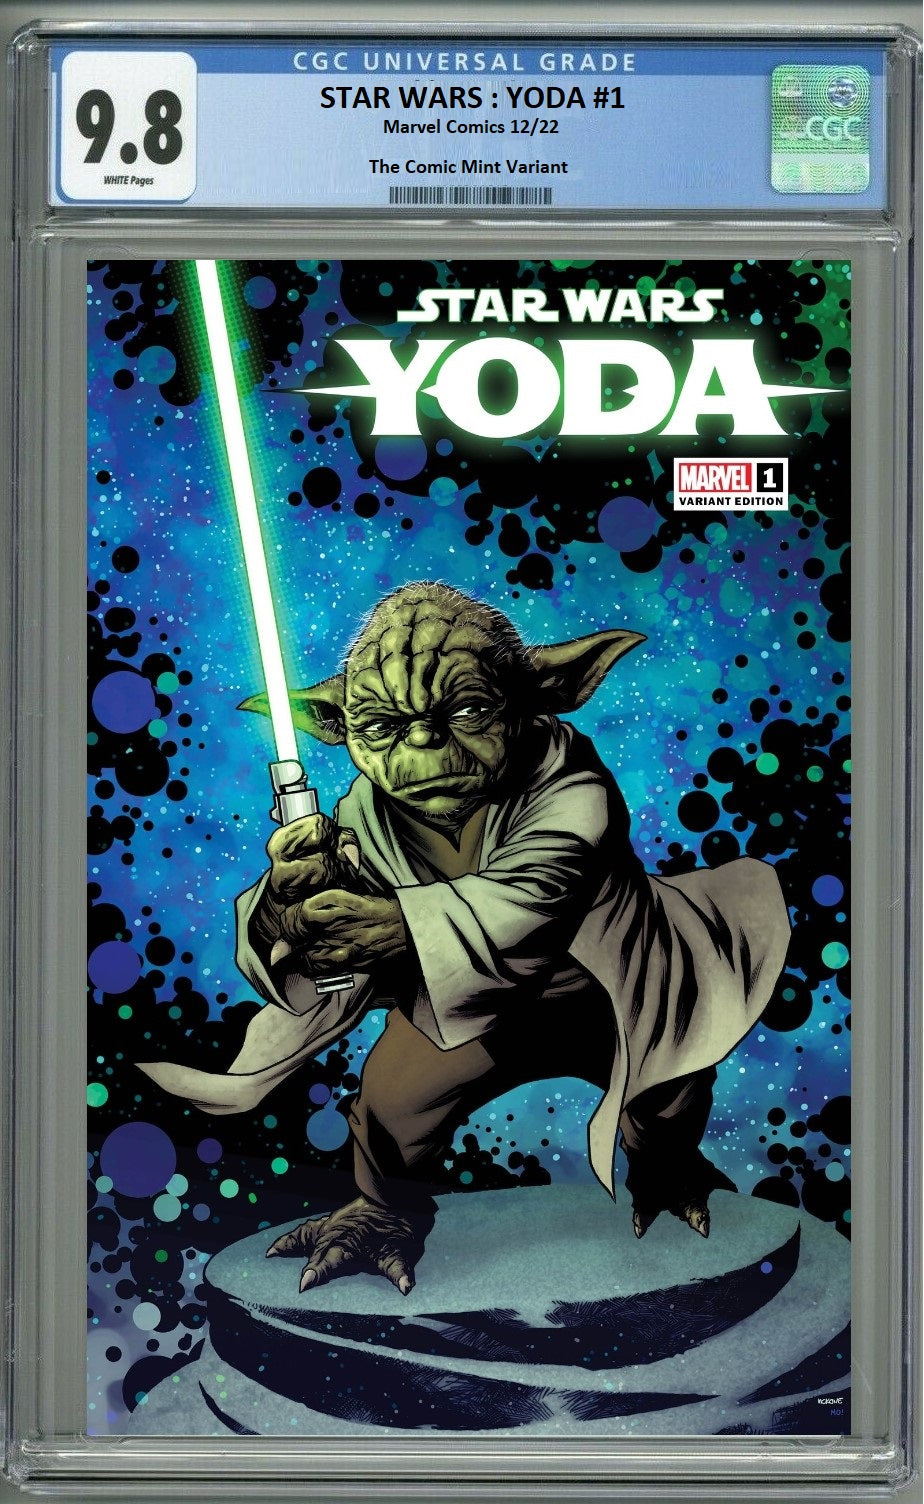 STAR WARS YODA #1 MIKE MCKONE VARIANT LIMITED TO 600 COPIES WITH NUMBERED COA CGC 9.8 PREORDER